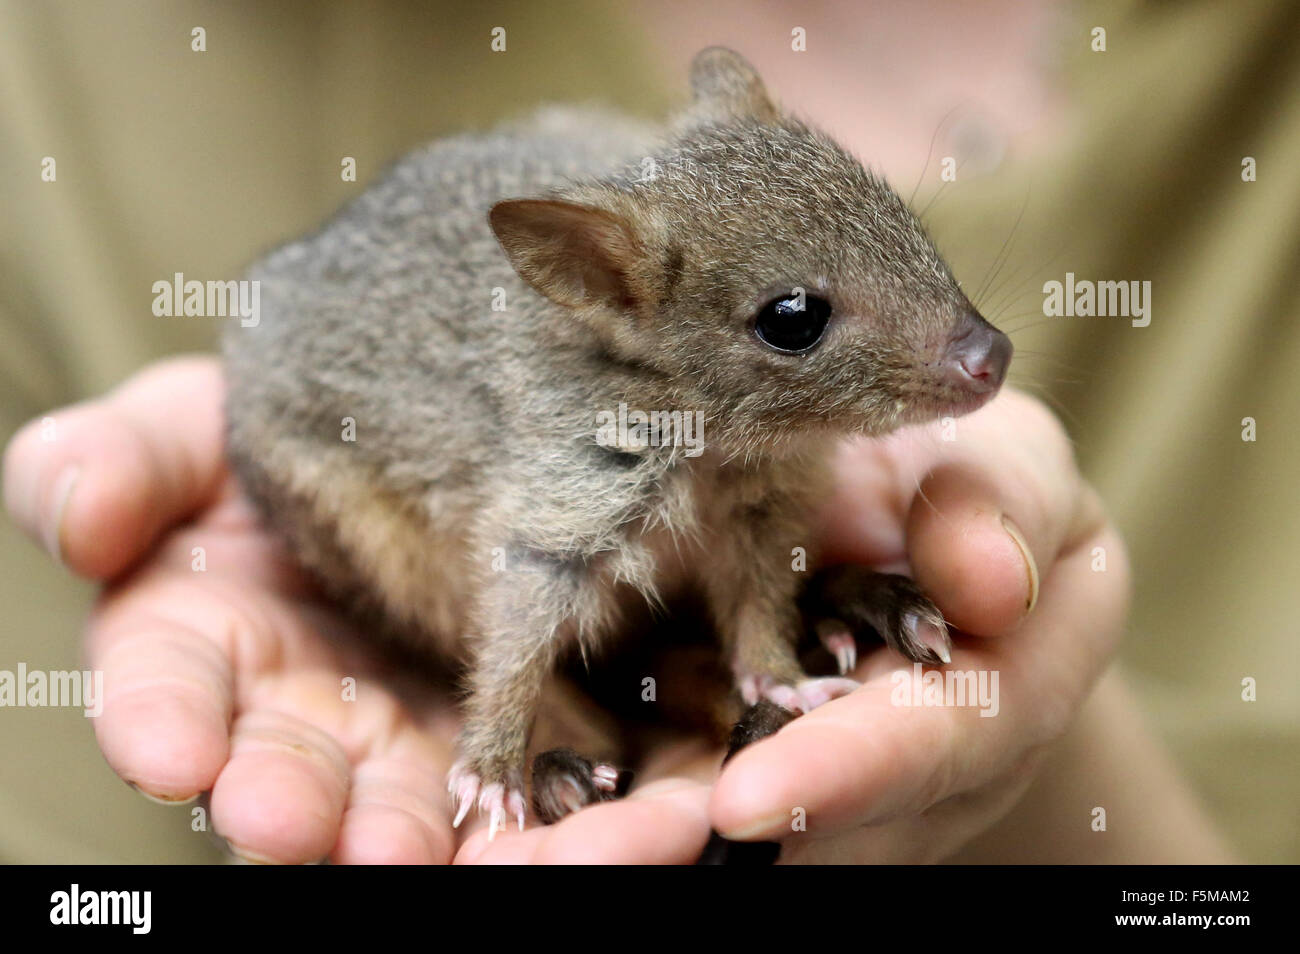 Duisburg, Germany. 6th Nov, 2015. Four-month old Lucy the baby rat-kangaroo in the hands of her keeper Anna-Lena, at the zoo in Duisburg, Germany, 6 November 2015. Lucy is being raised by keepers because her mother died. PHOTO: ROLAND WEIHRAUCH/DPA/Alamy Live News Stock Photo